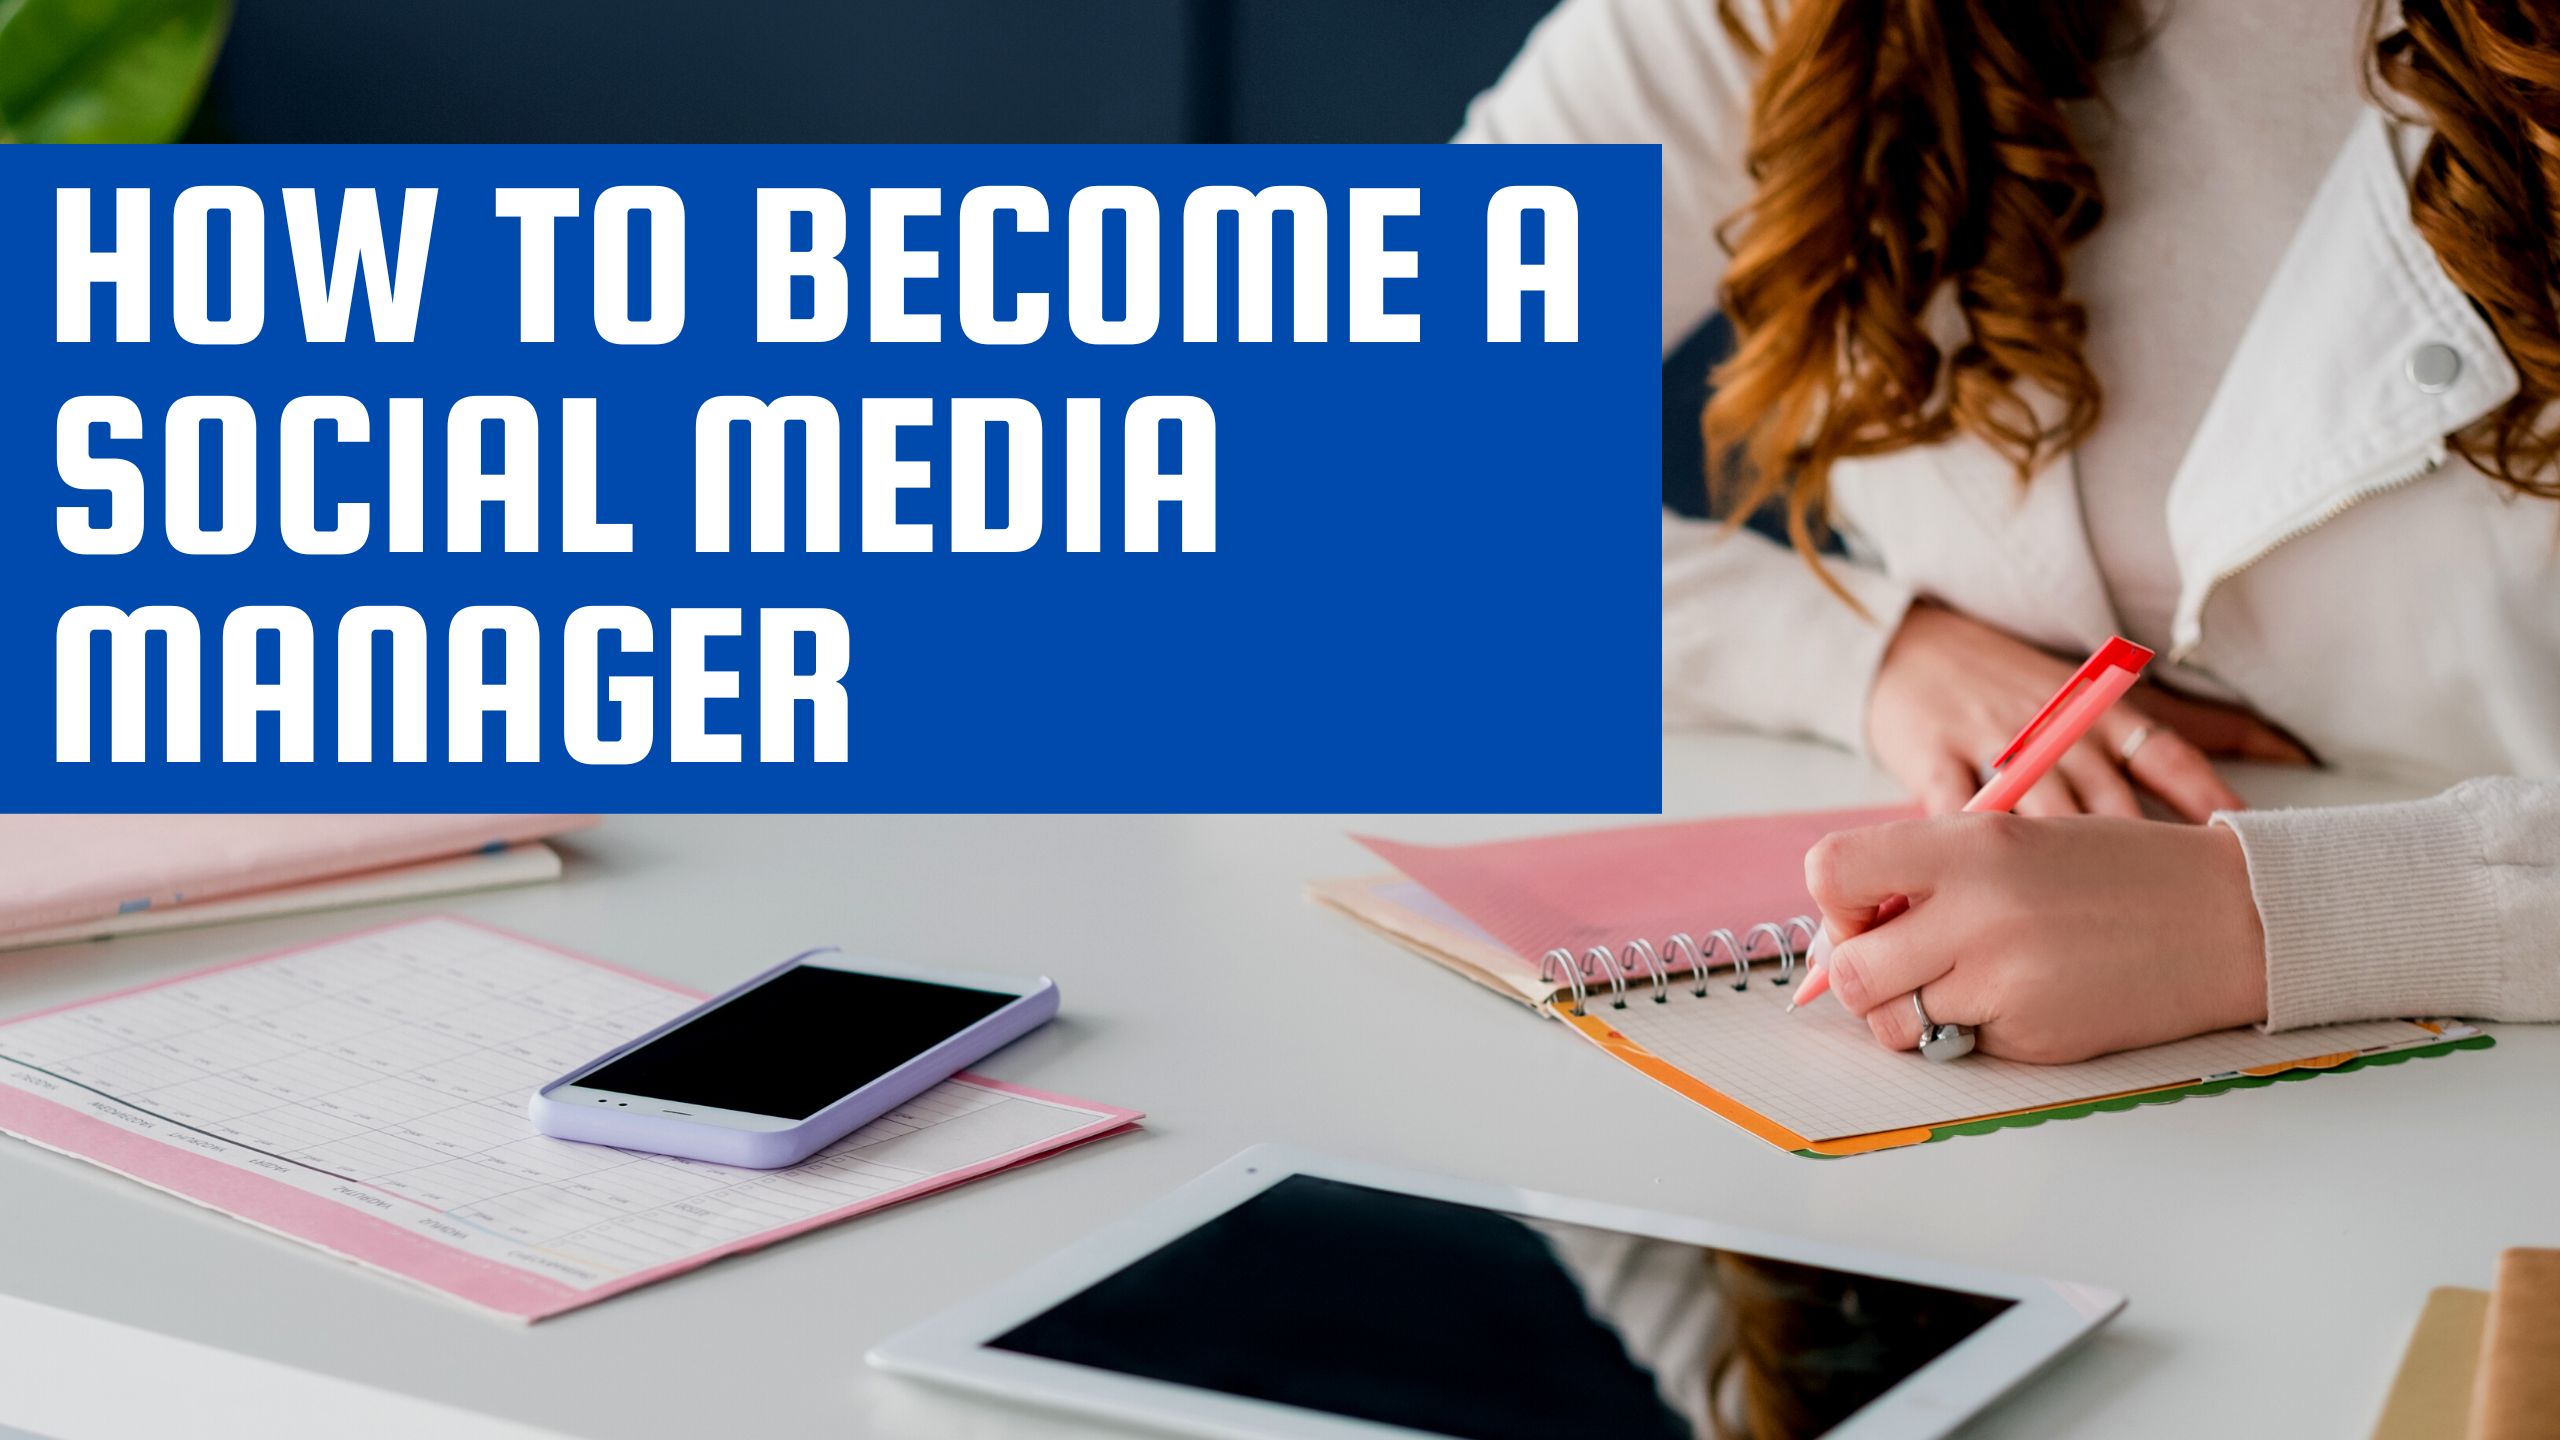 Social Media Manager: How to Become One, Courses, Income